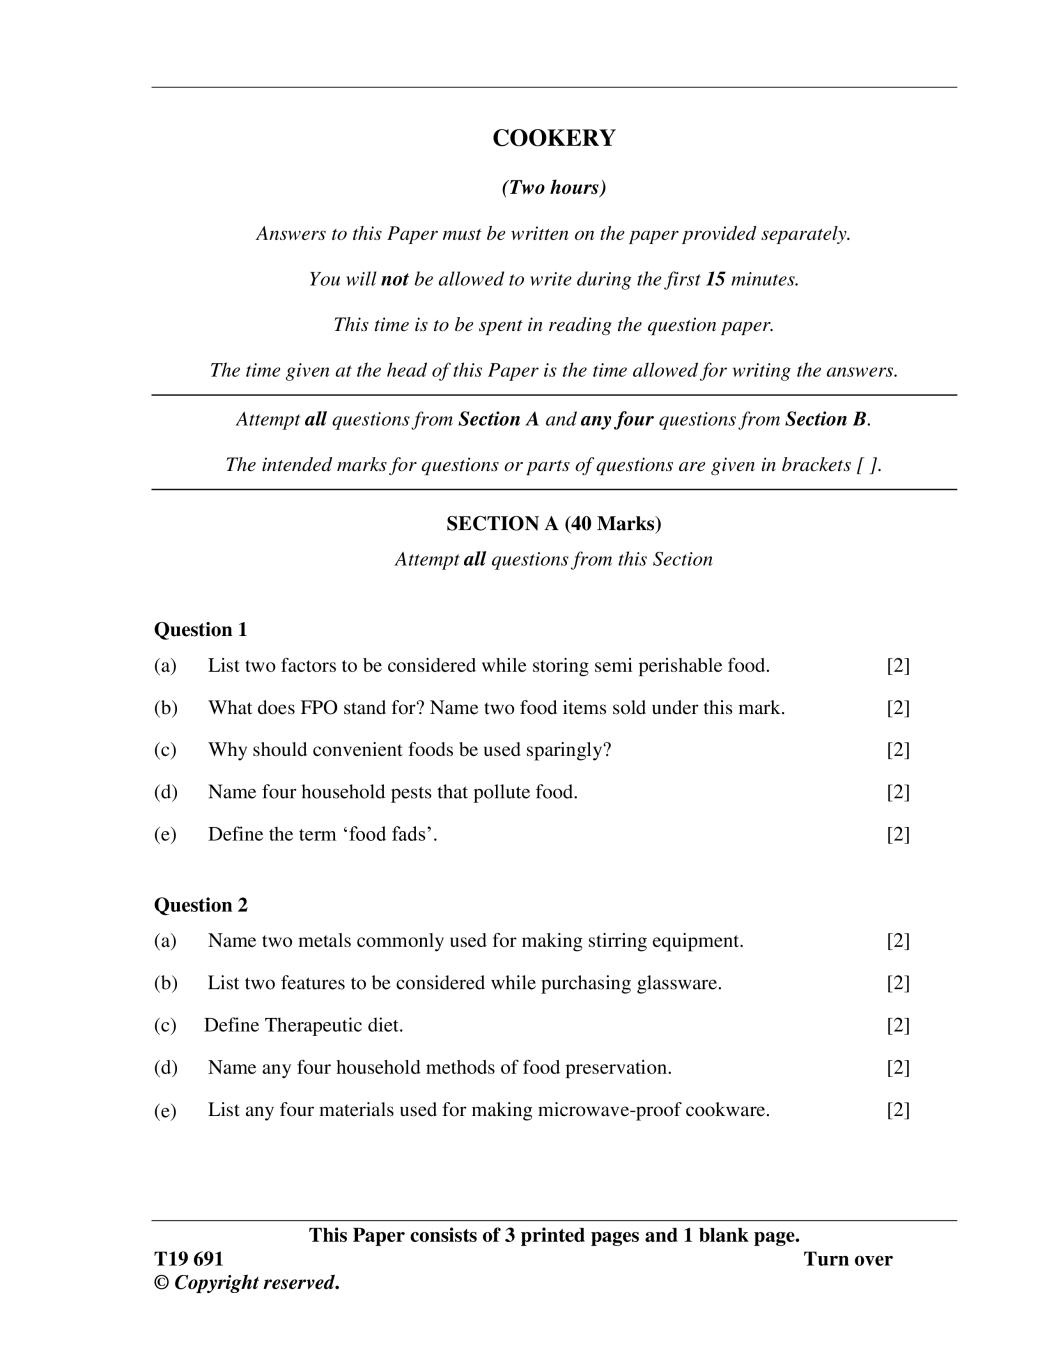 ICSE Class 10 Question Paper 2019 for Cookery  - Page 1